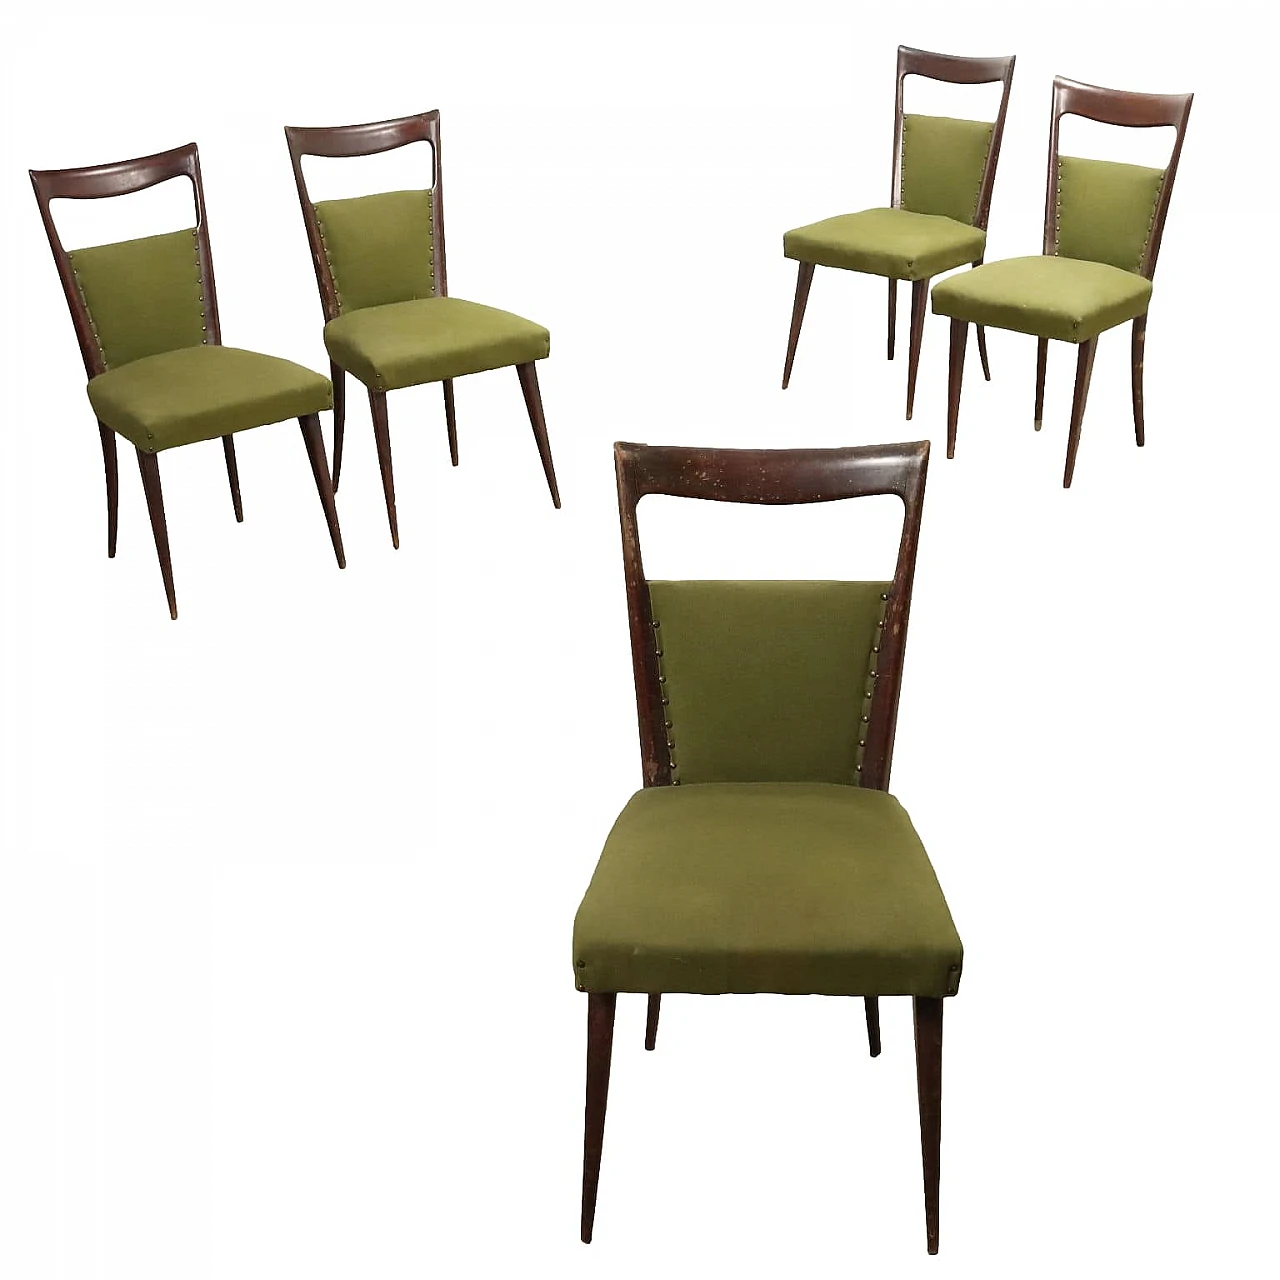 5 Stained beech wood chairs with green fabric, 1950s 1